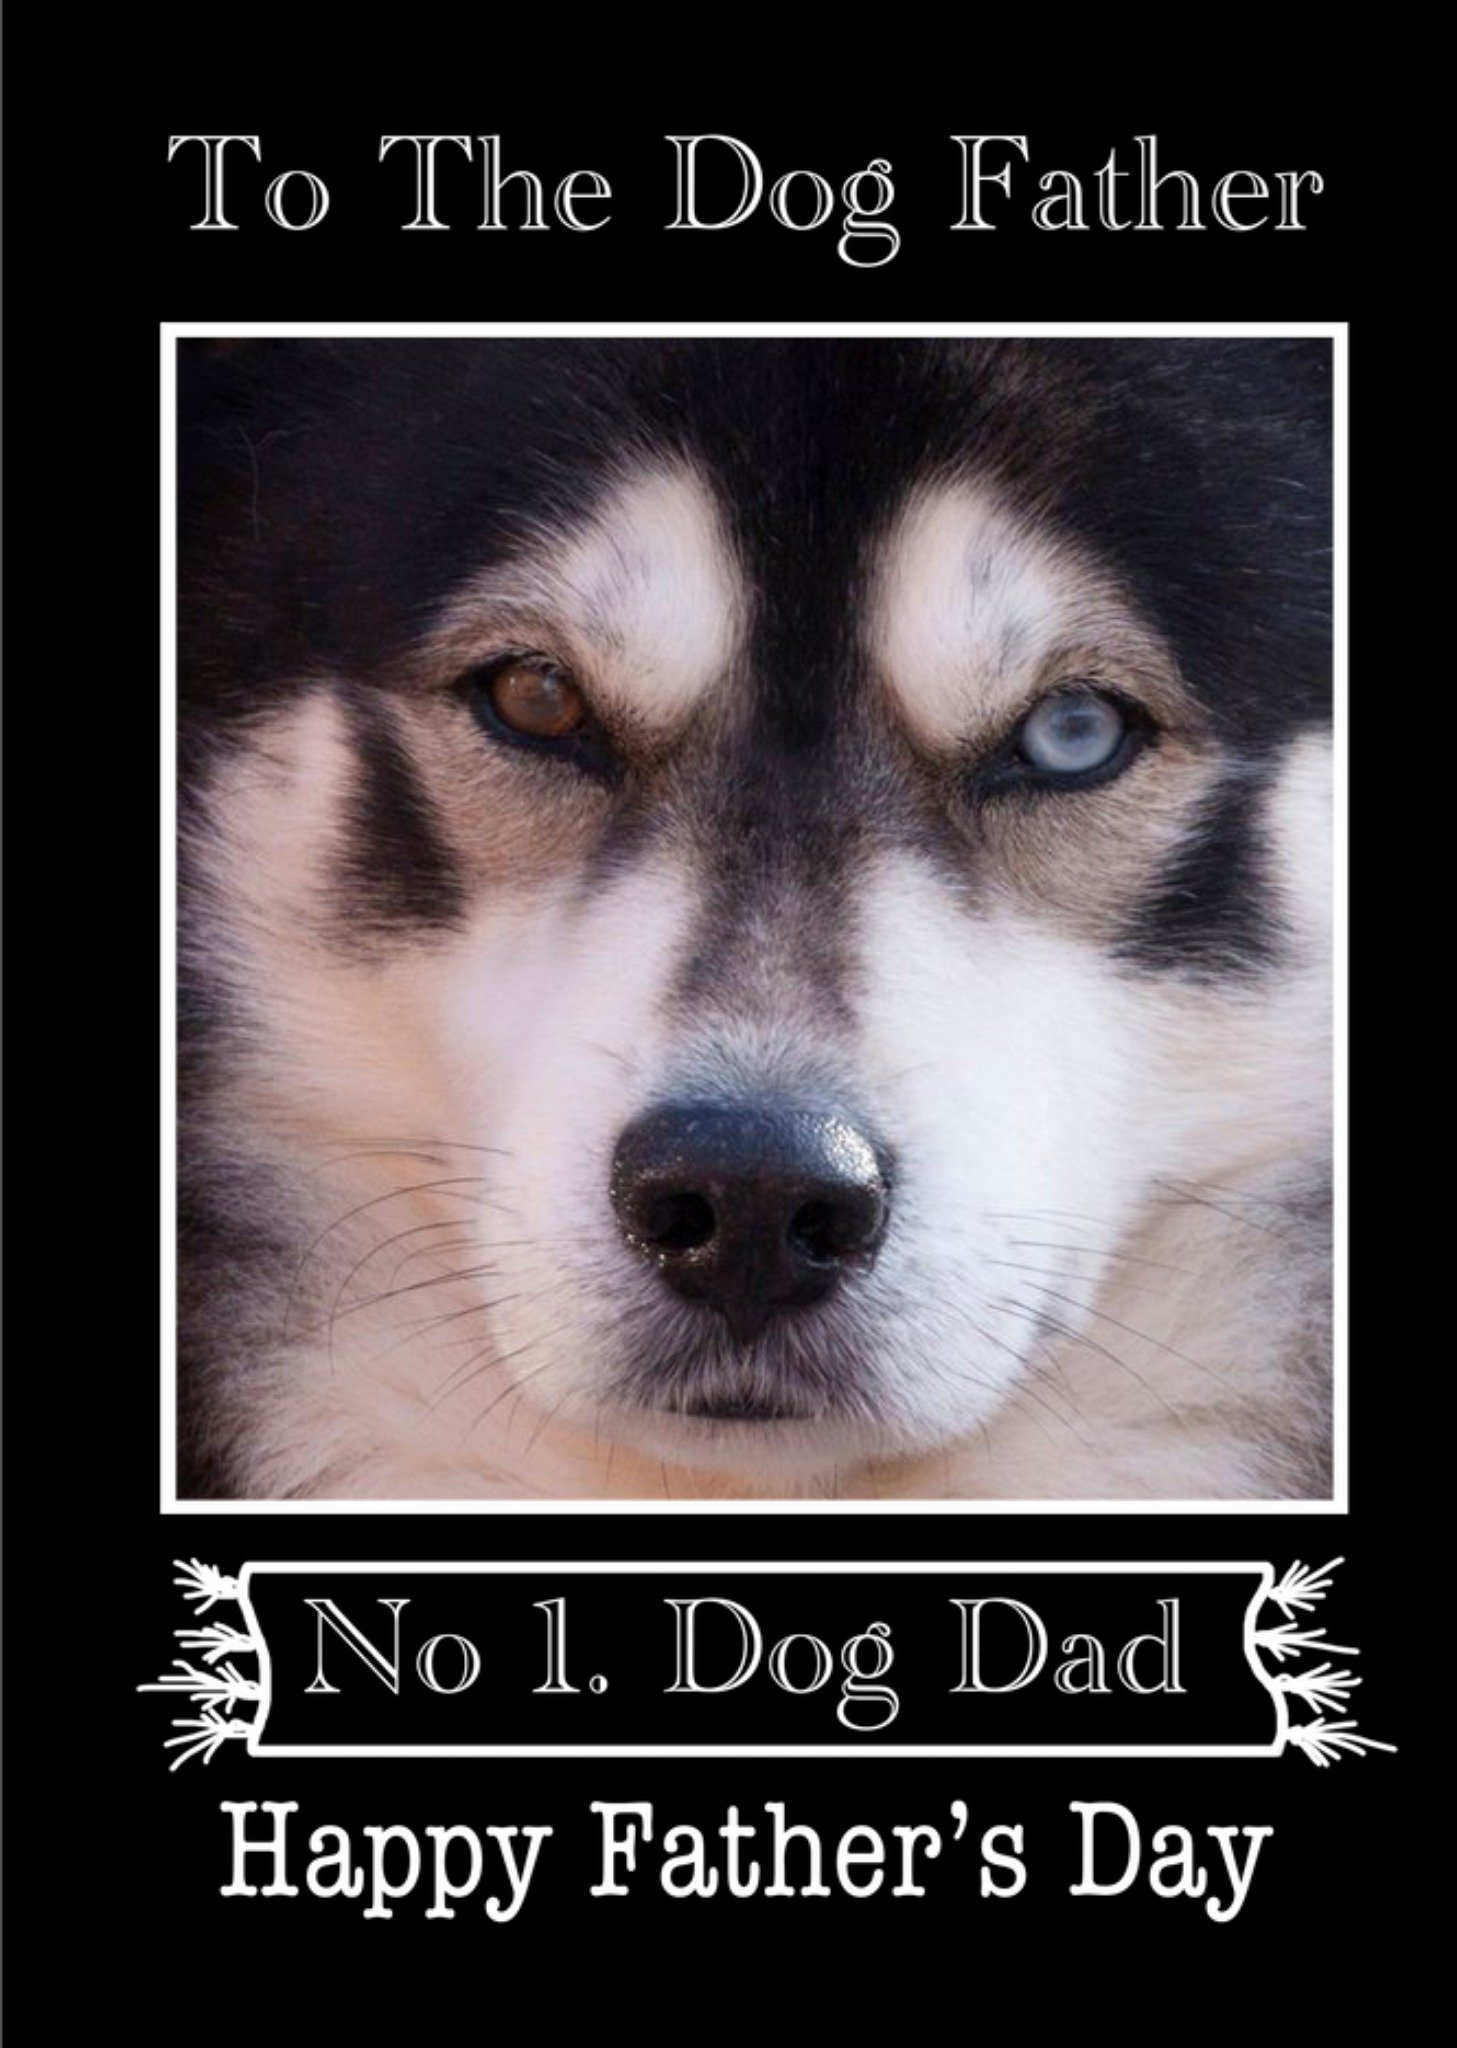 Moonpig Photo Of A Husky To The Dog Father No 1 Dog Dad Photo Upload Father's Day Card Ecard